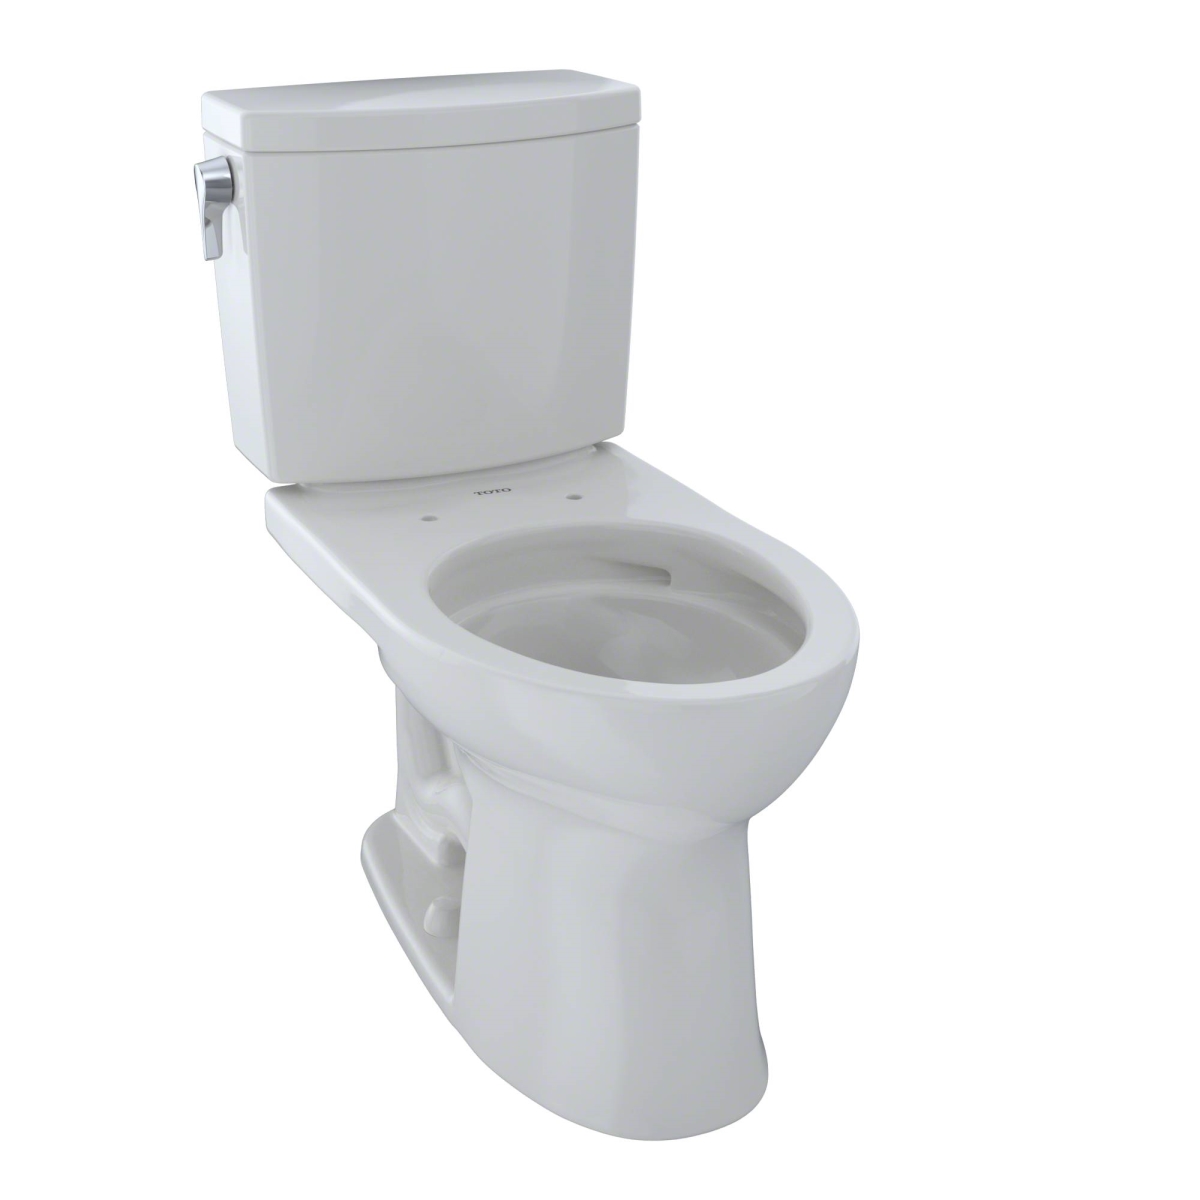 Cst454cufg-11 Elongated 1.0 Gpf Universal Height Toilet, Colonial White